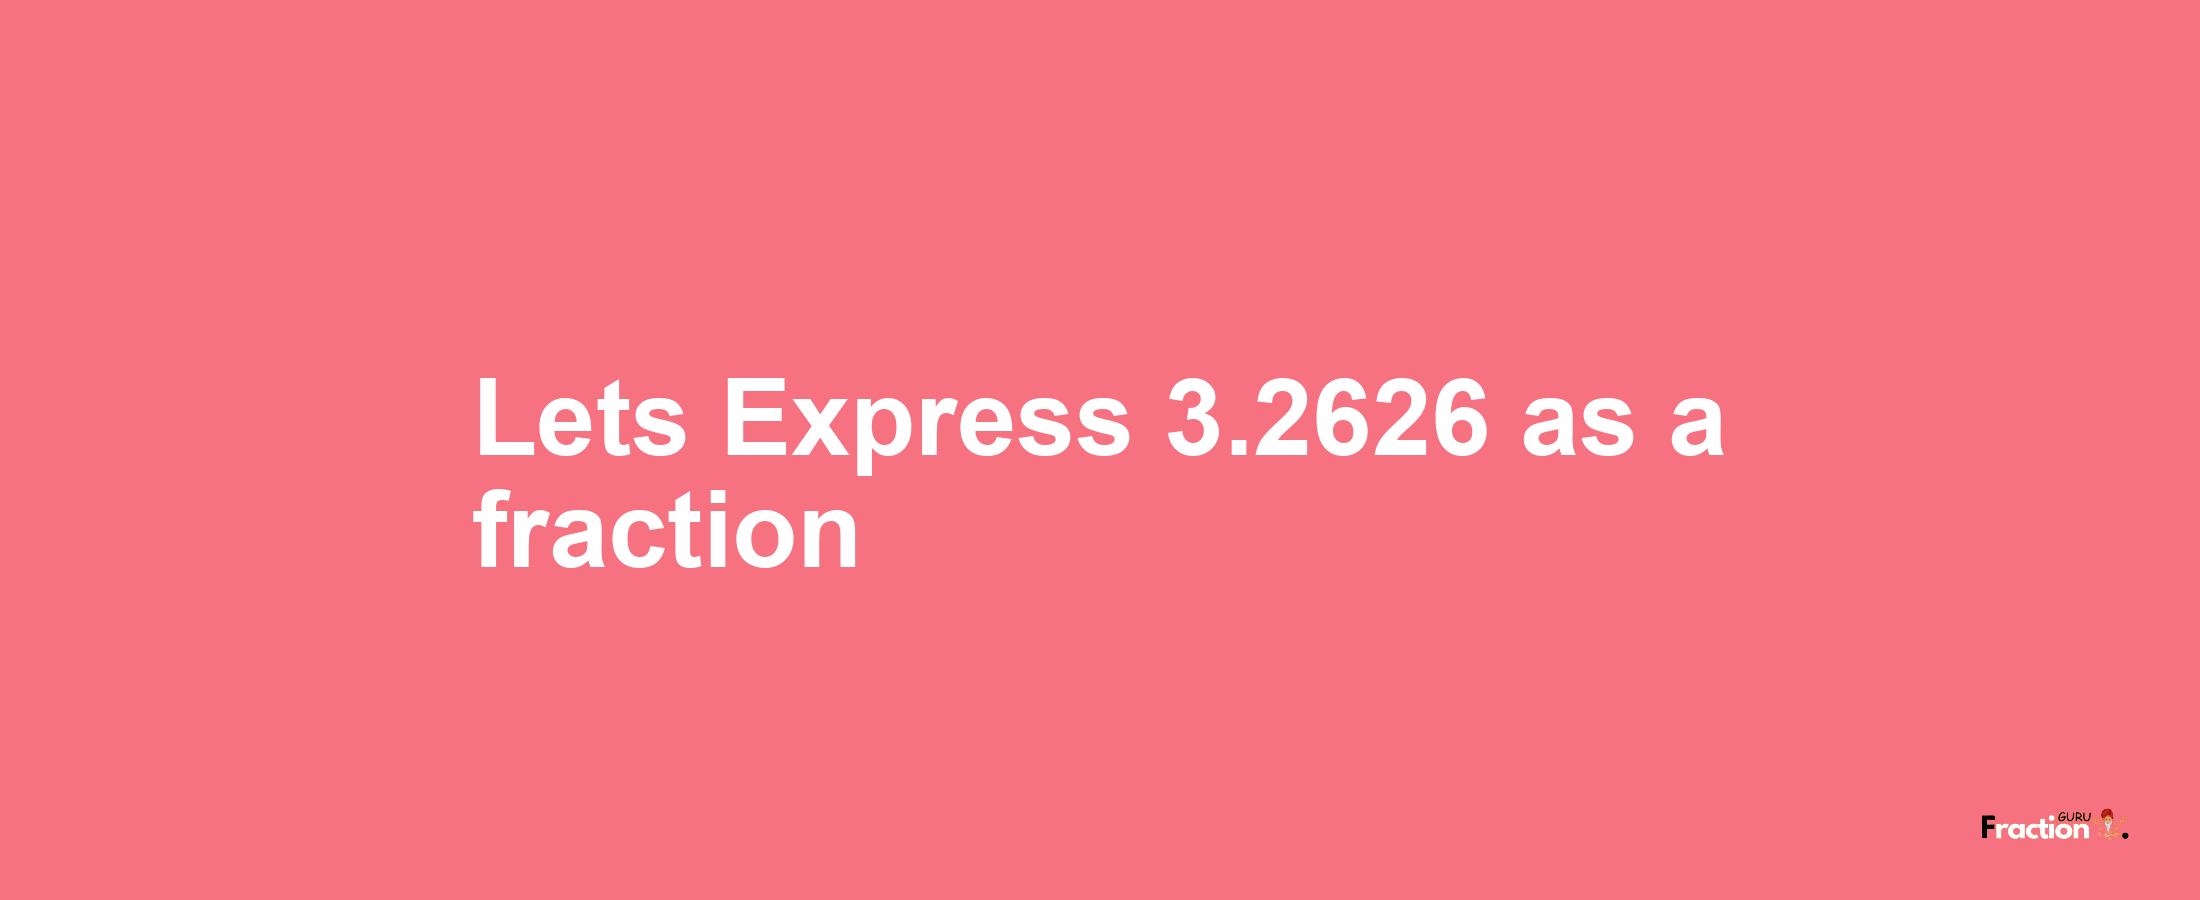 Lets Express 3.2626 as afraction